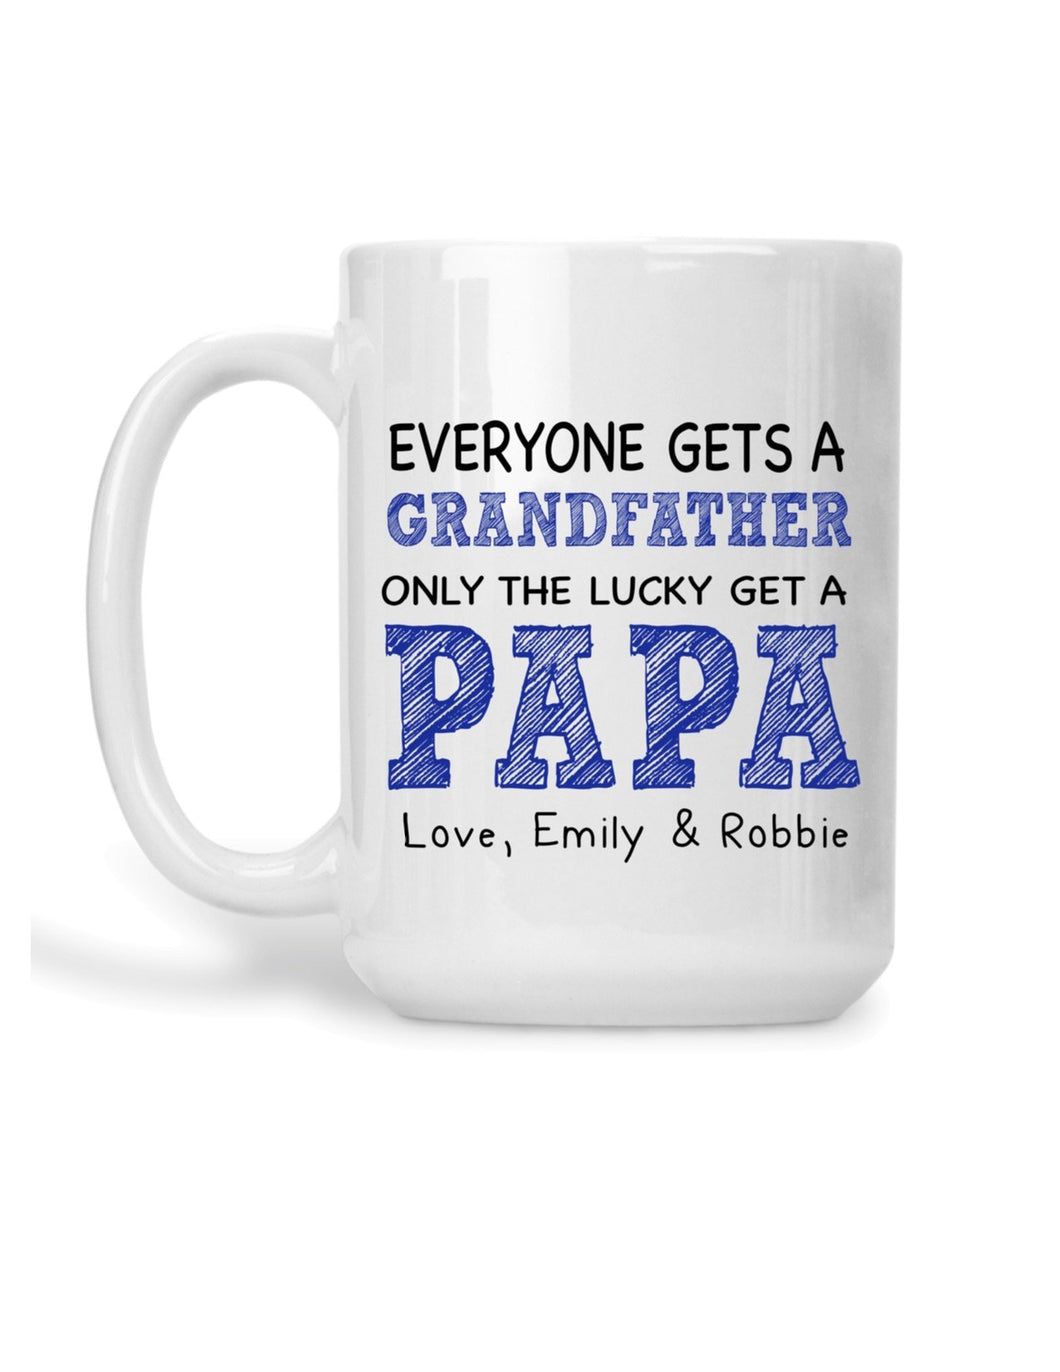 Everyone gets a Grandfather